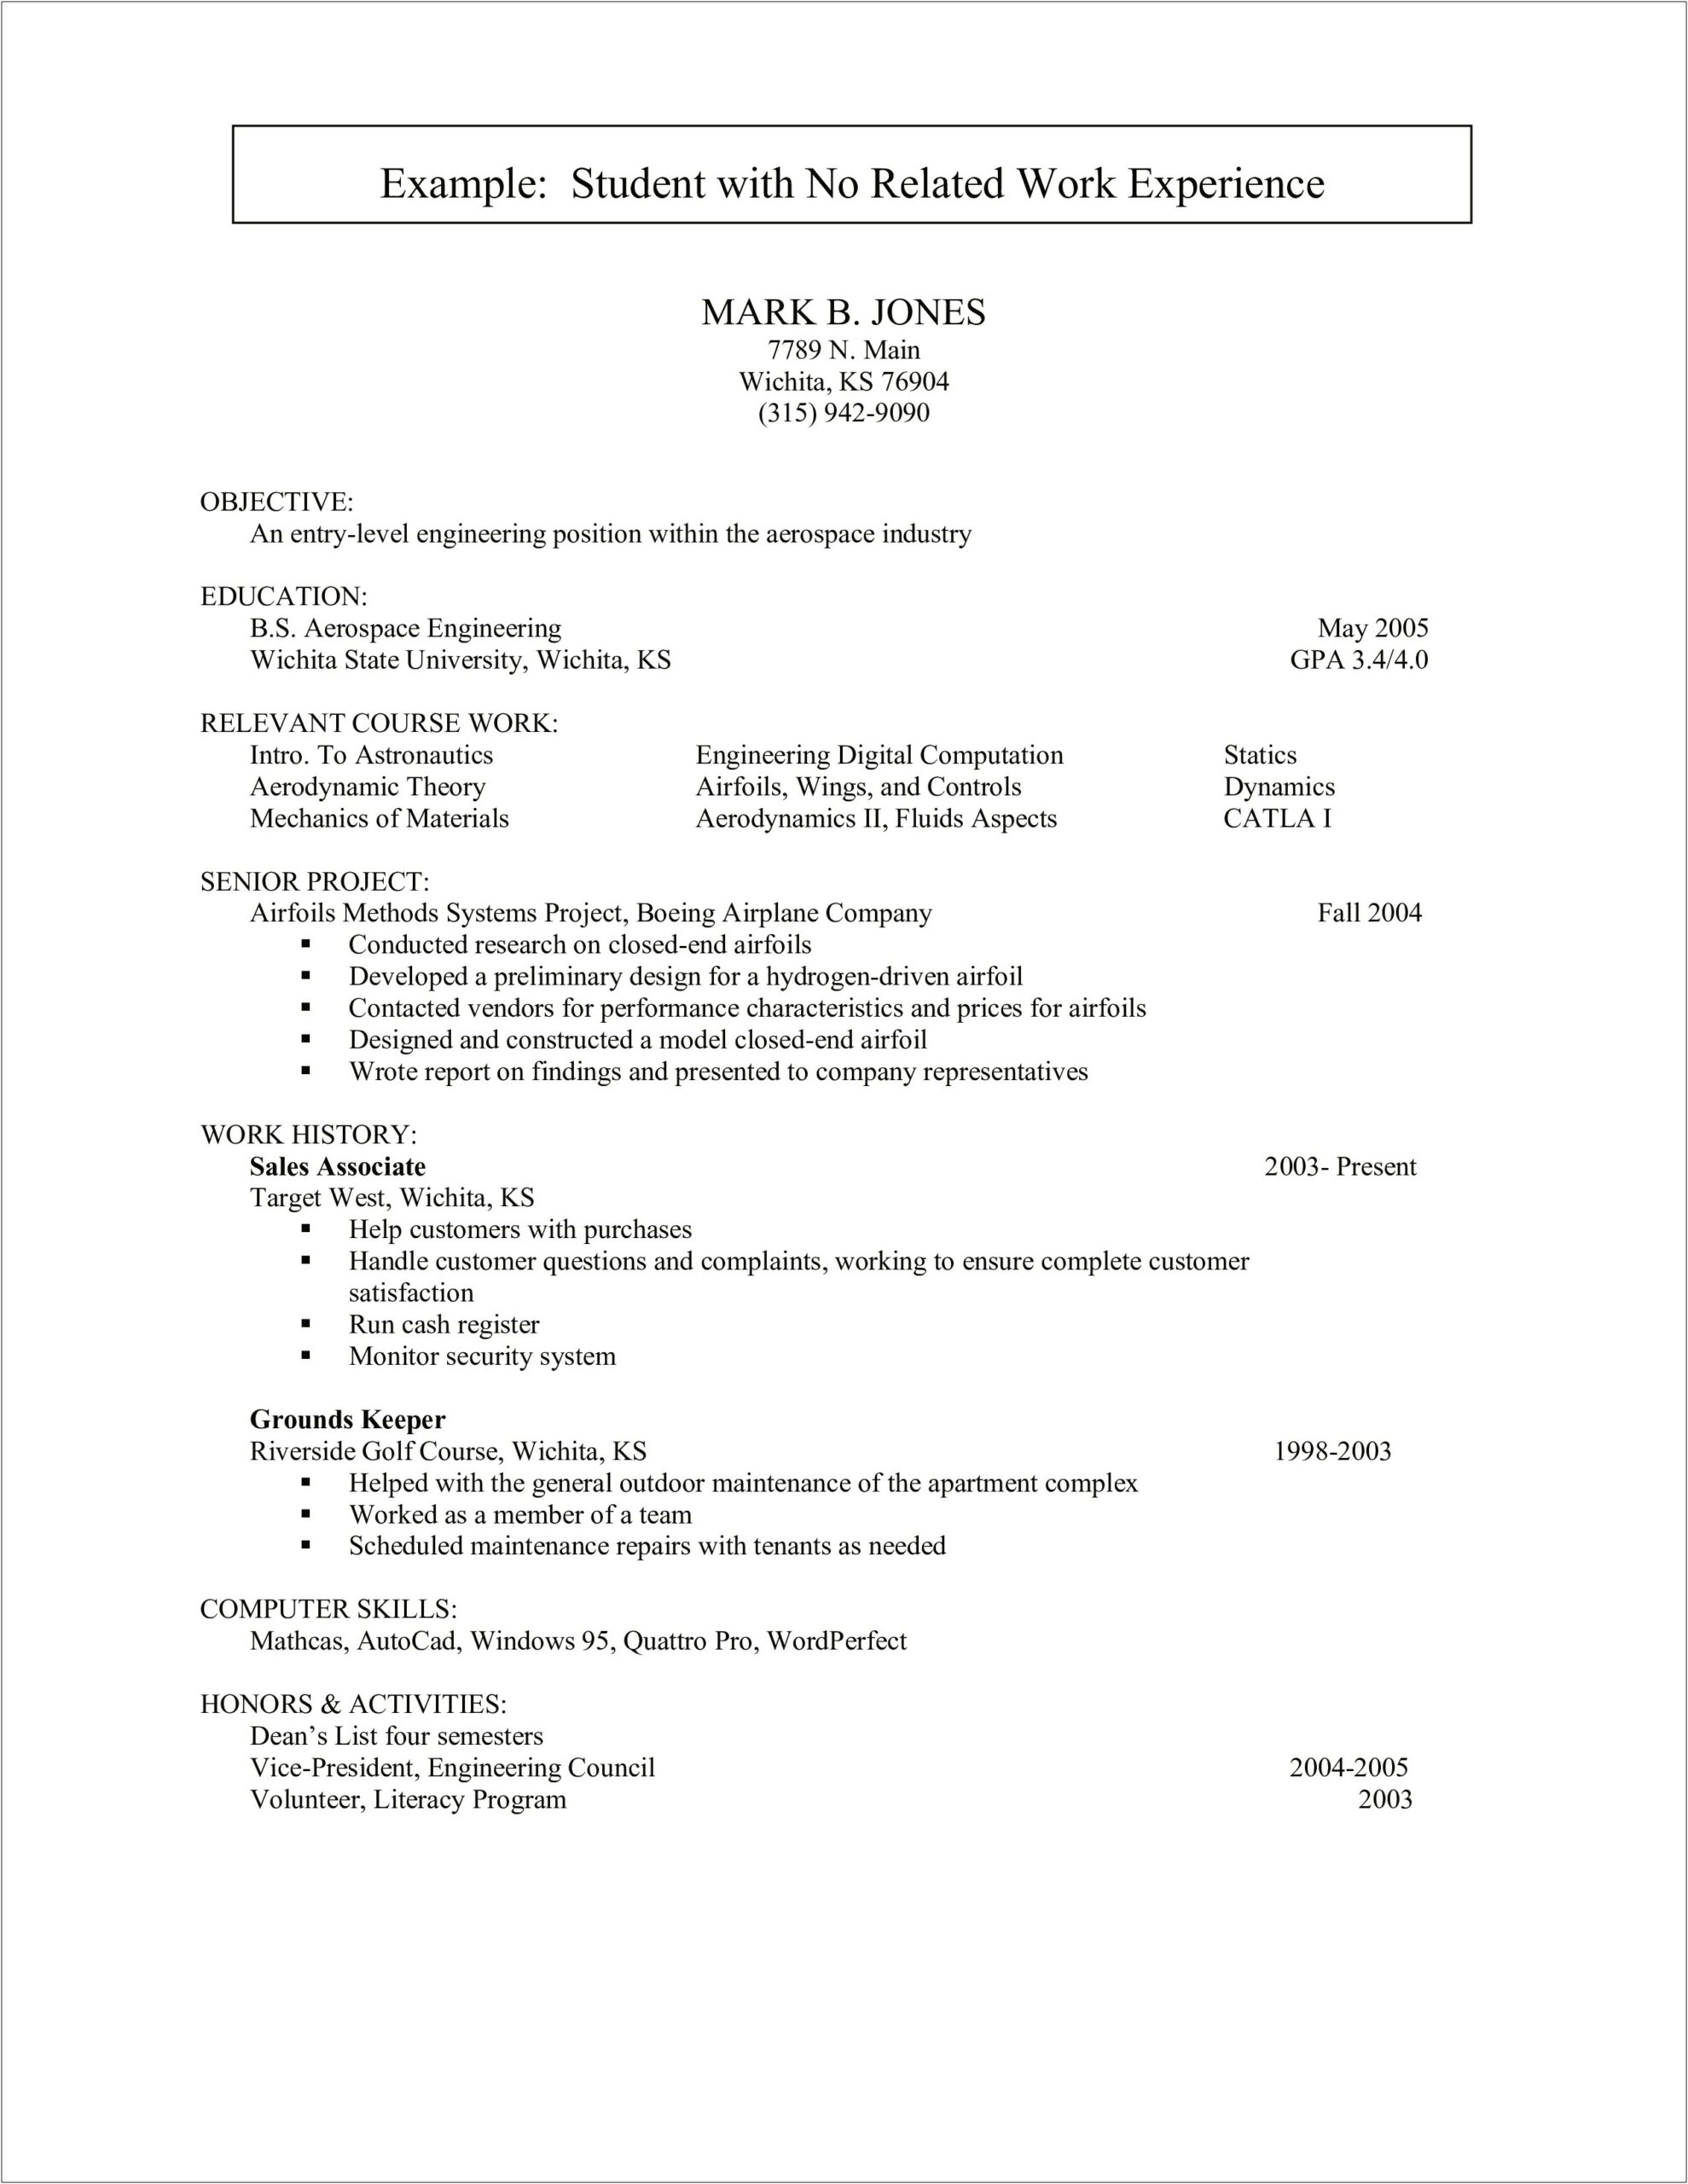 Resume No Experience Objective Examples